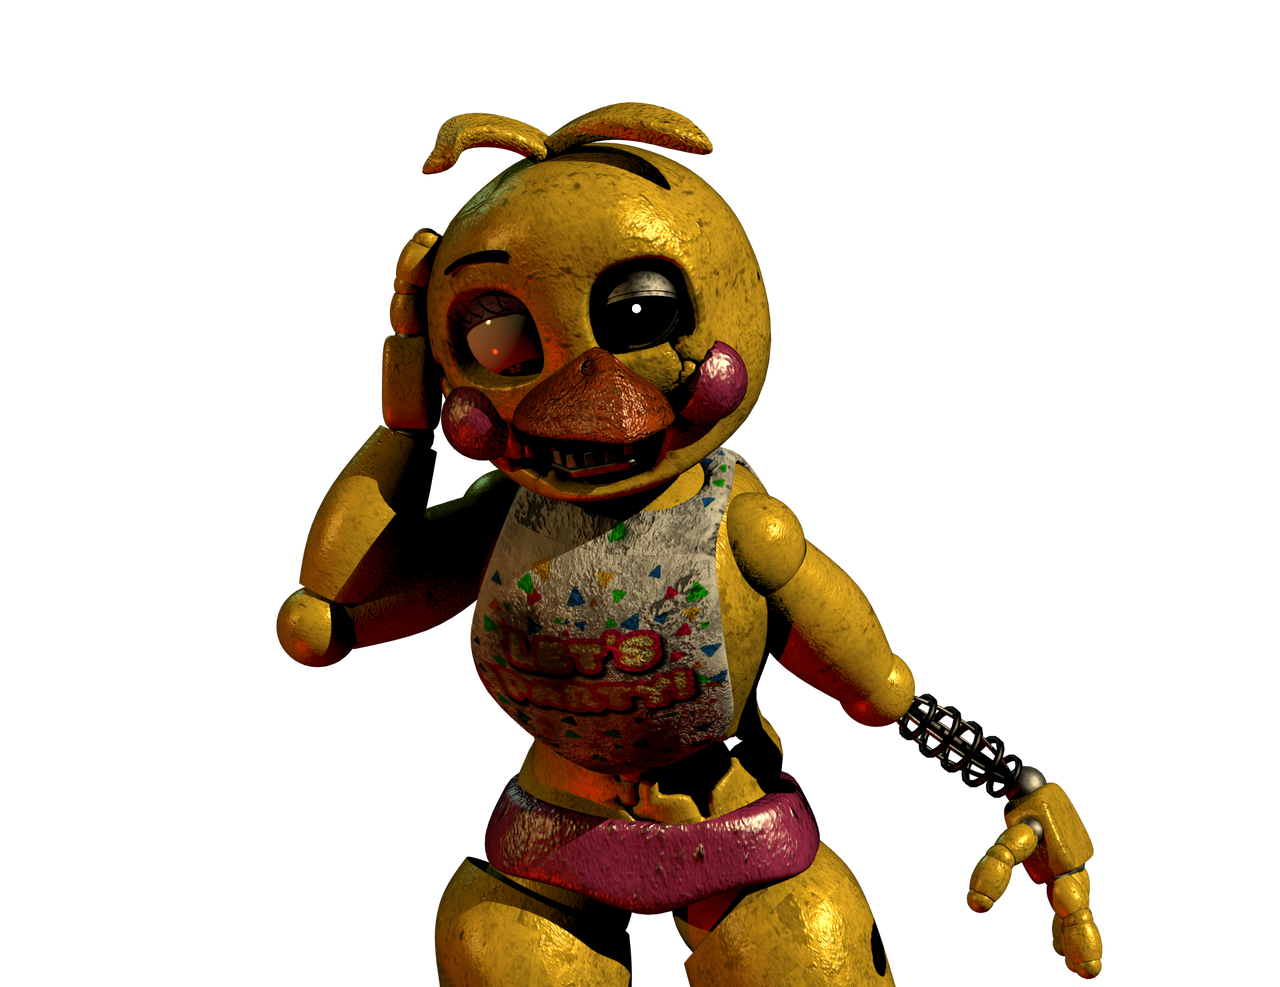 Chica and Withered Chica by Torres4 on DeviantArt